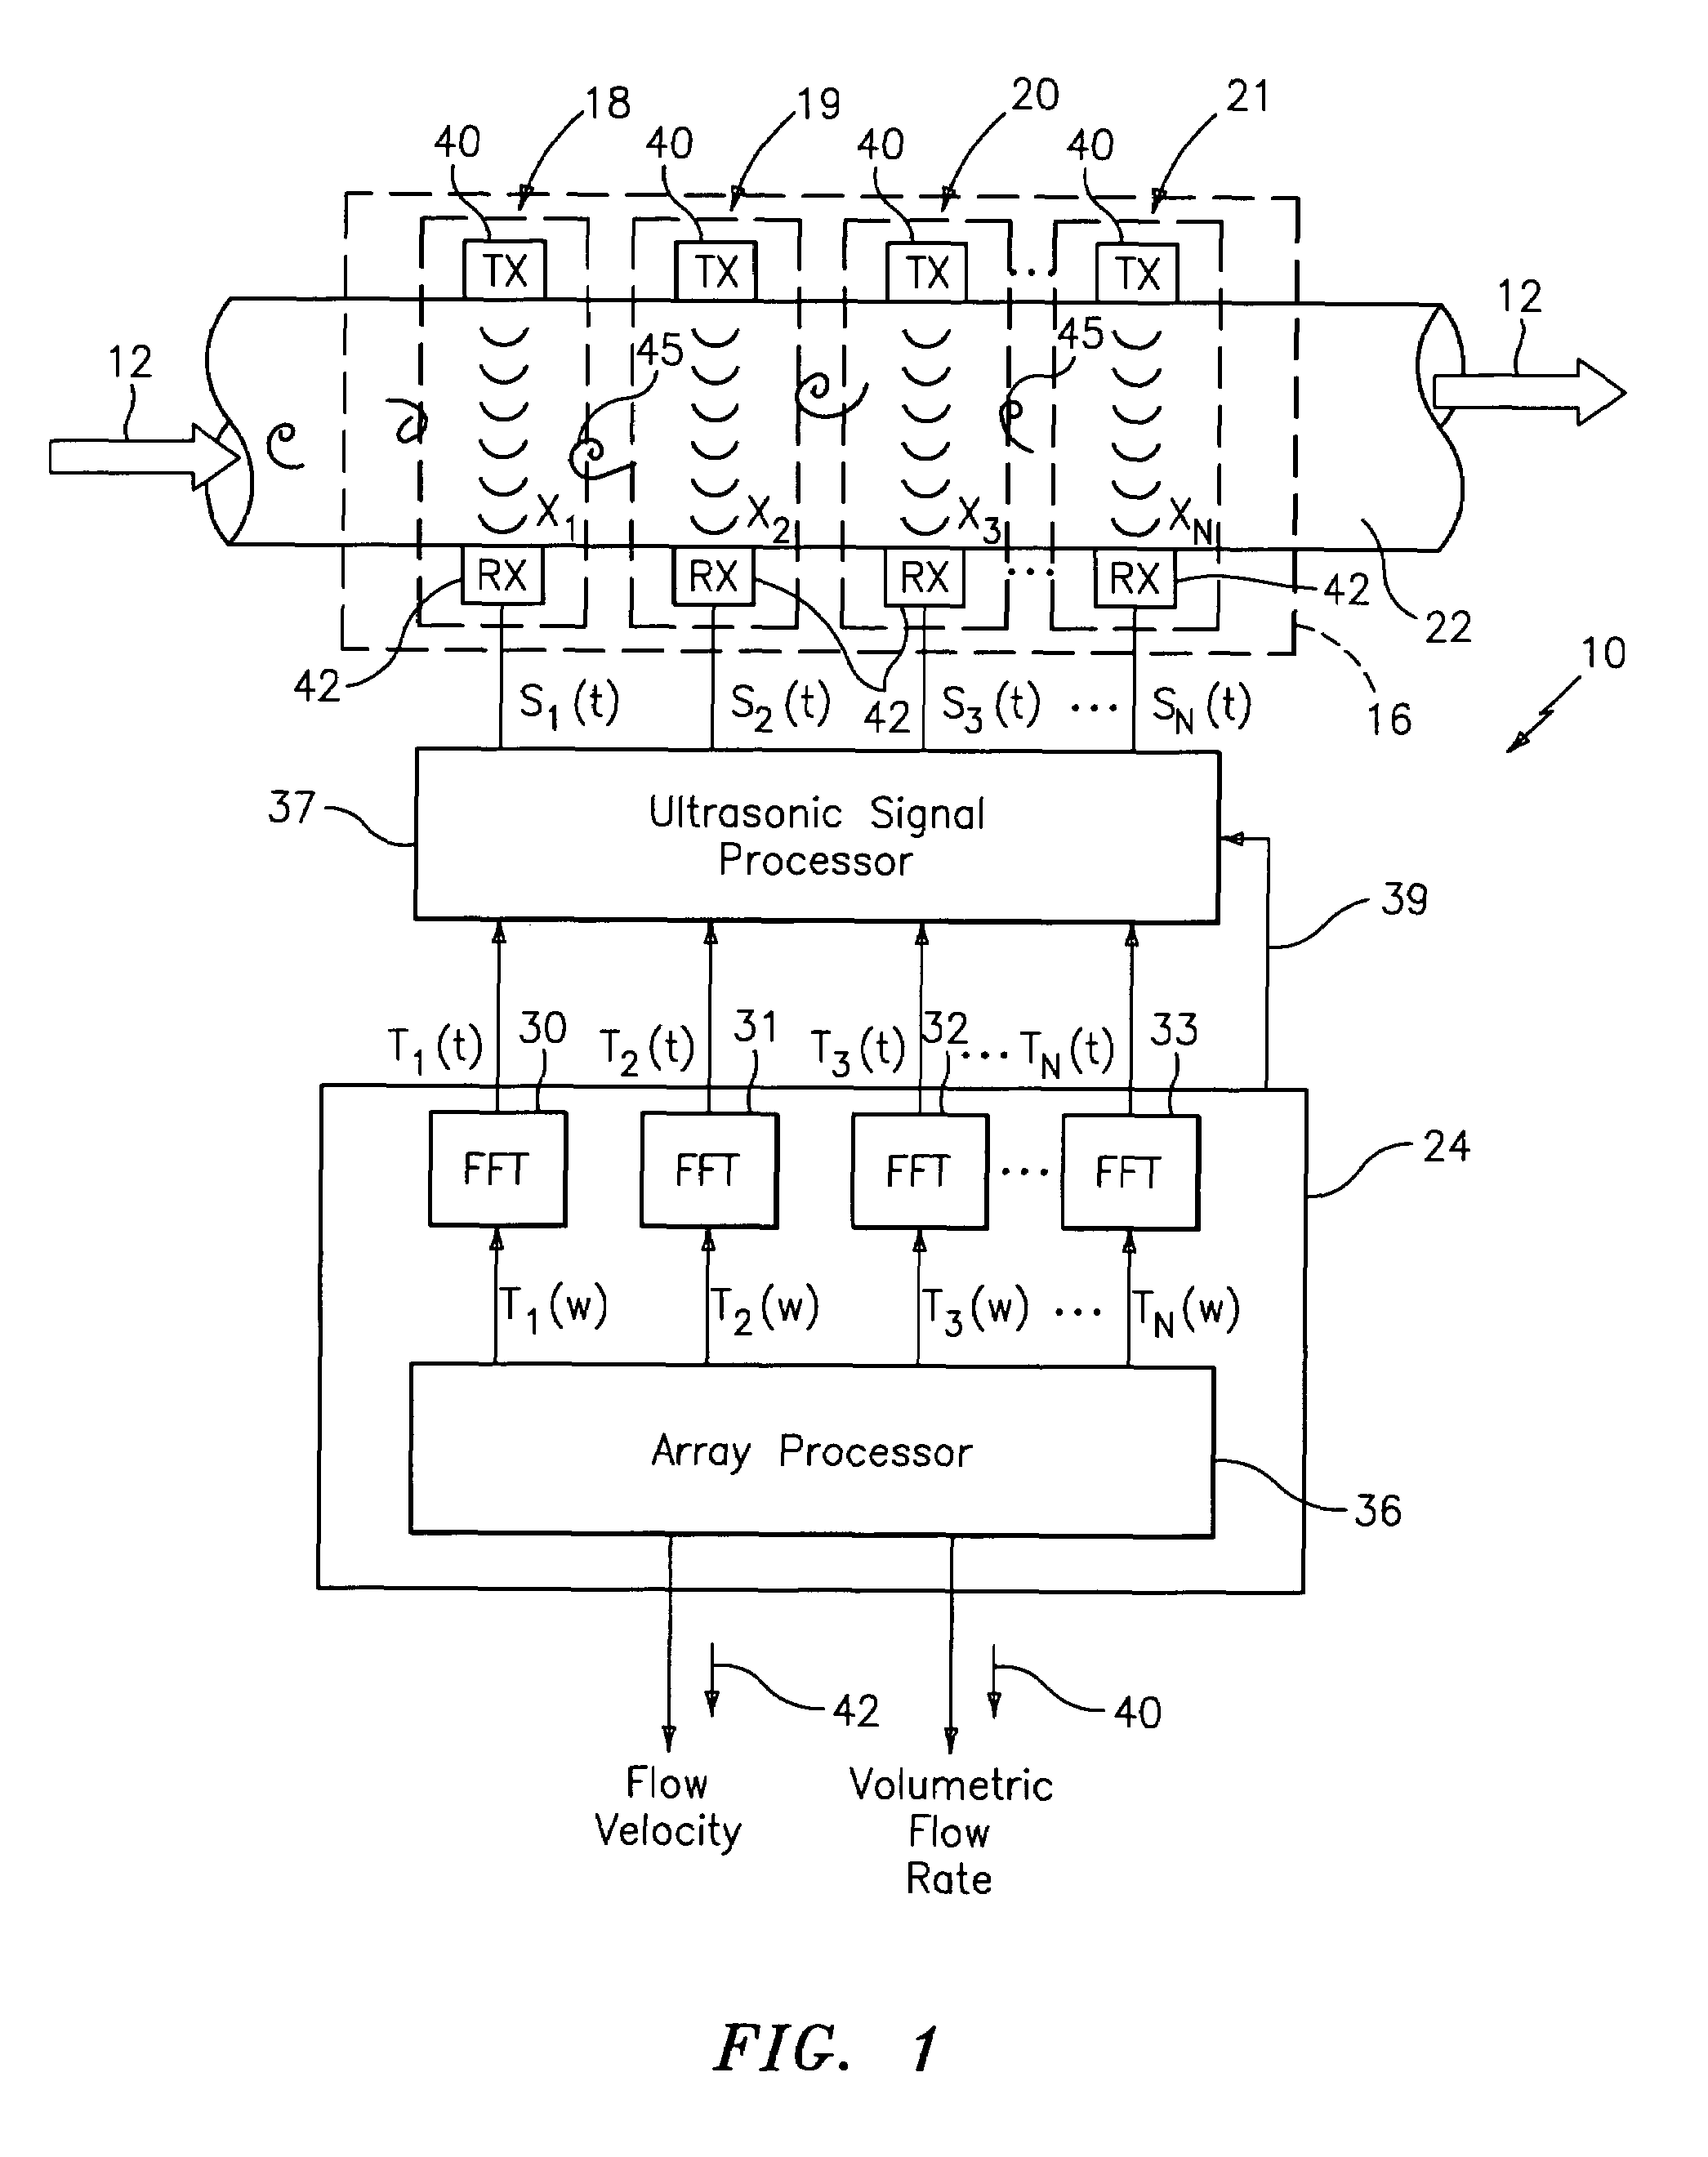 Apparatus and method using an array of ultrasonic sensors for determining the velocity of a fluid within a pipe